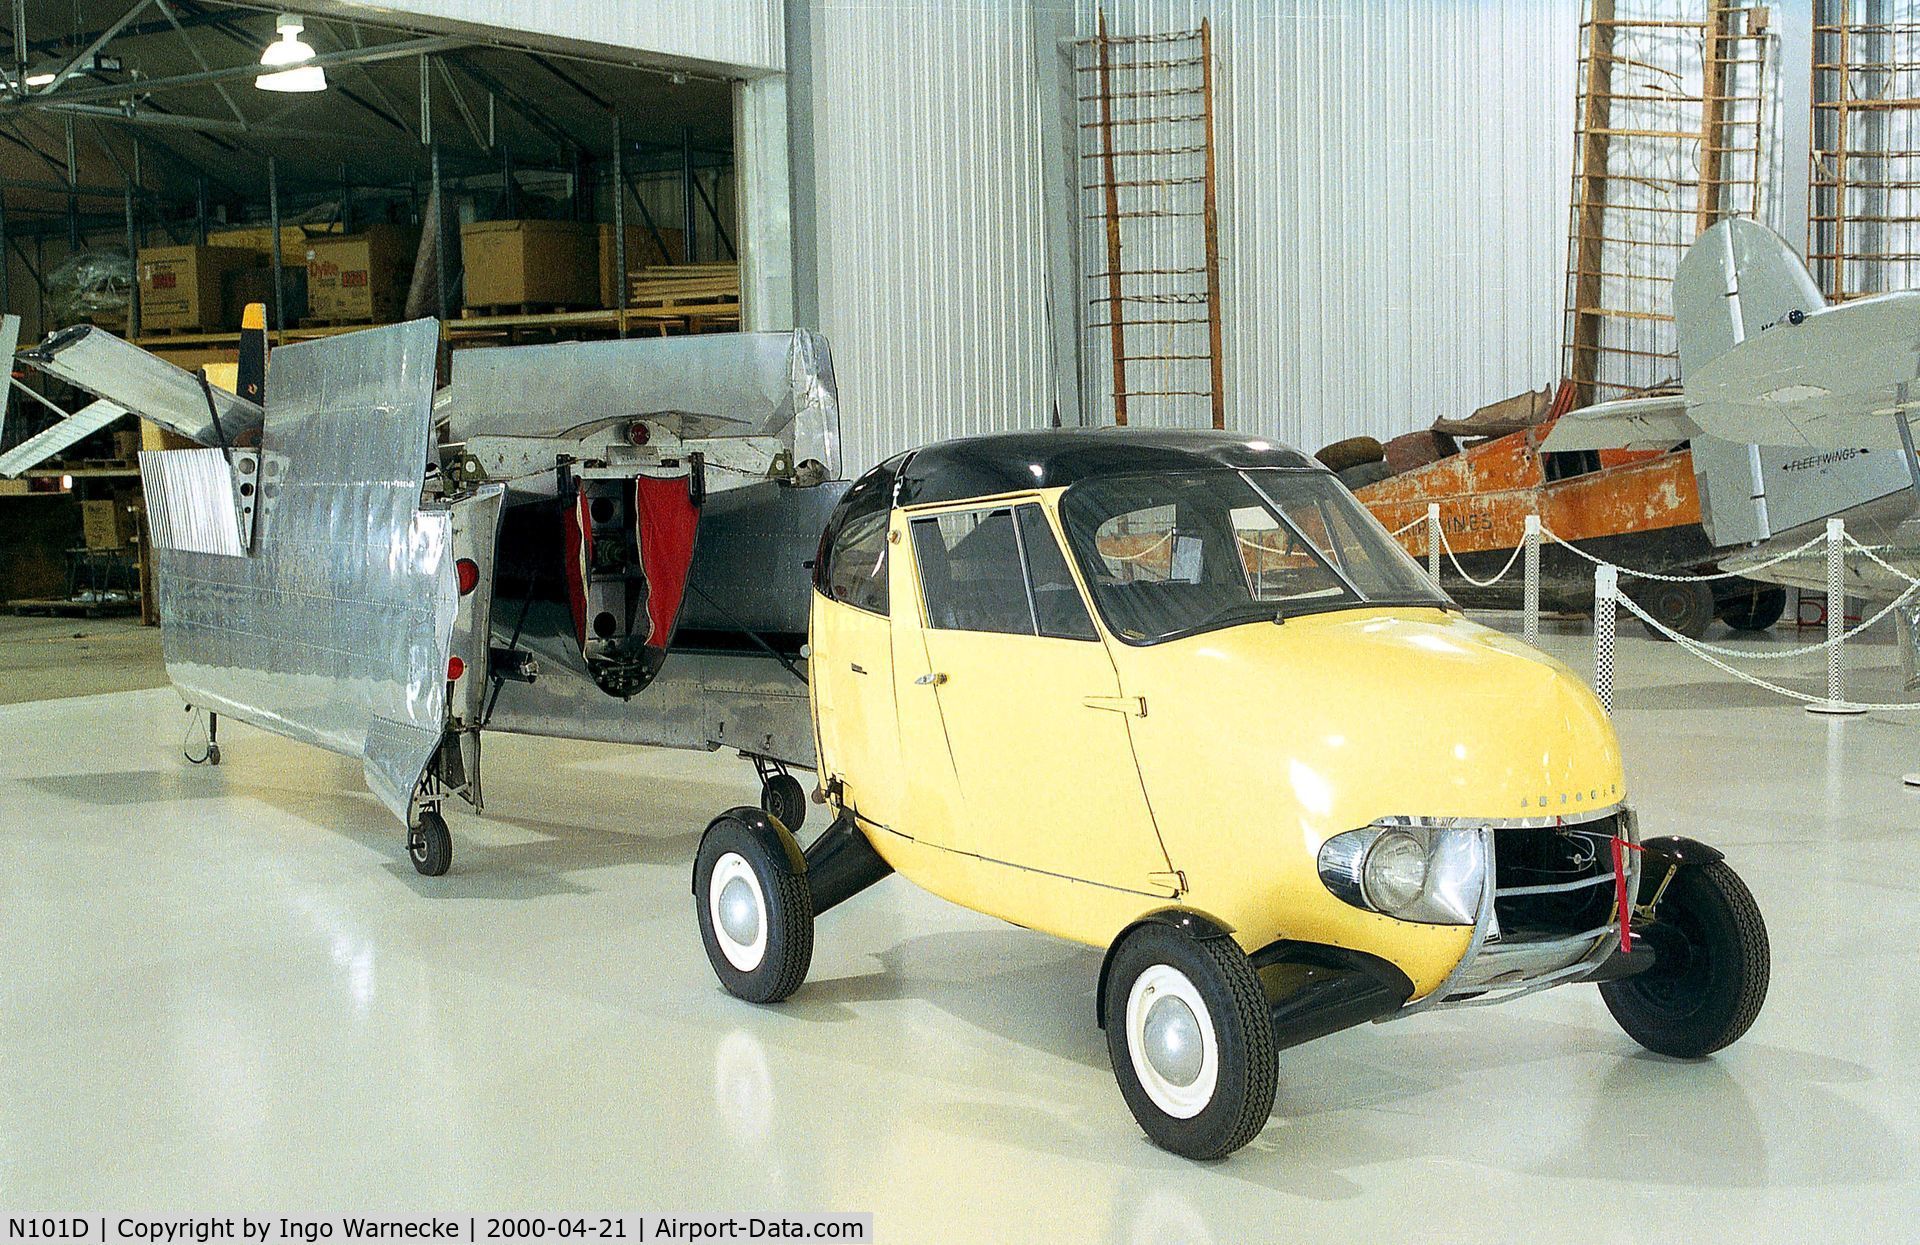 N101D, 1954 Taylor Aerocar I C/N 3, Taylor Aerocar One in road-configuration at the Golden Wings Flying Museum, Blaine MN